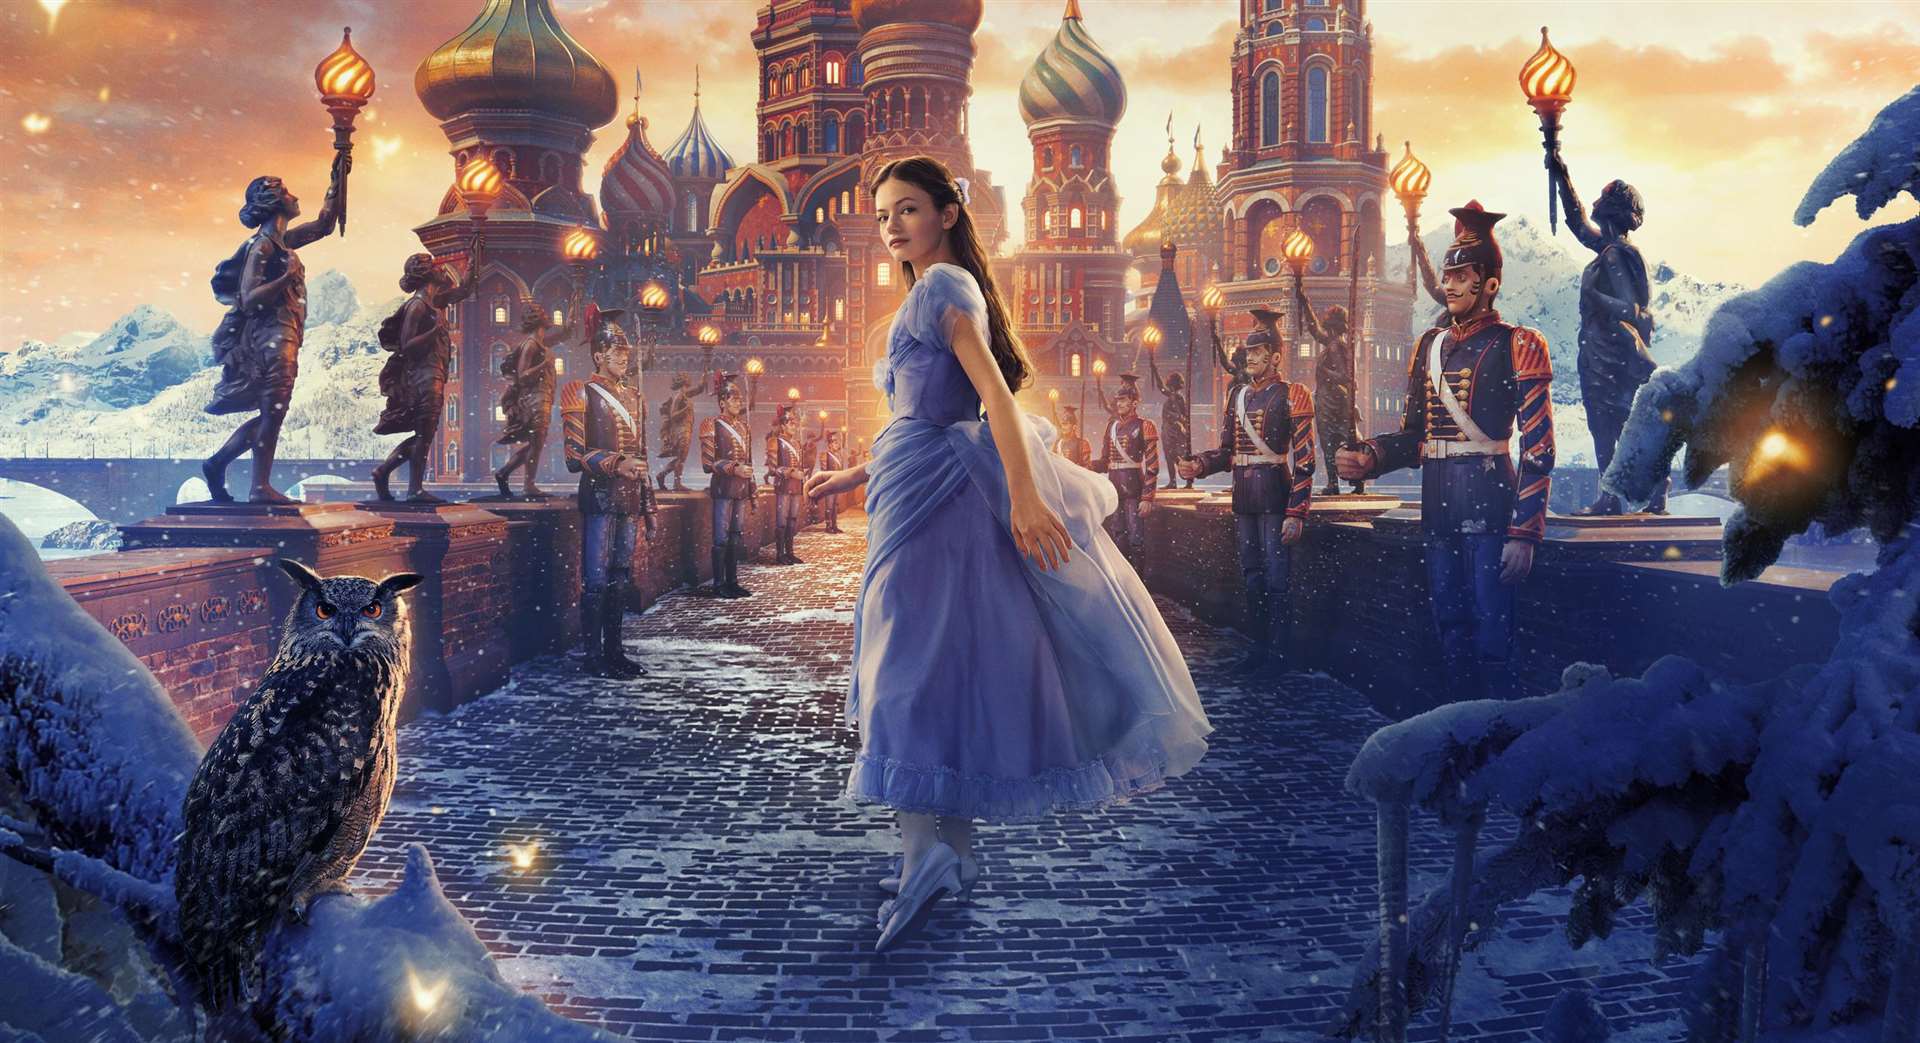 The Nutcracker and the Four Realms (12A) will be screened this weekend